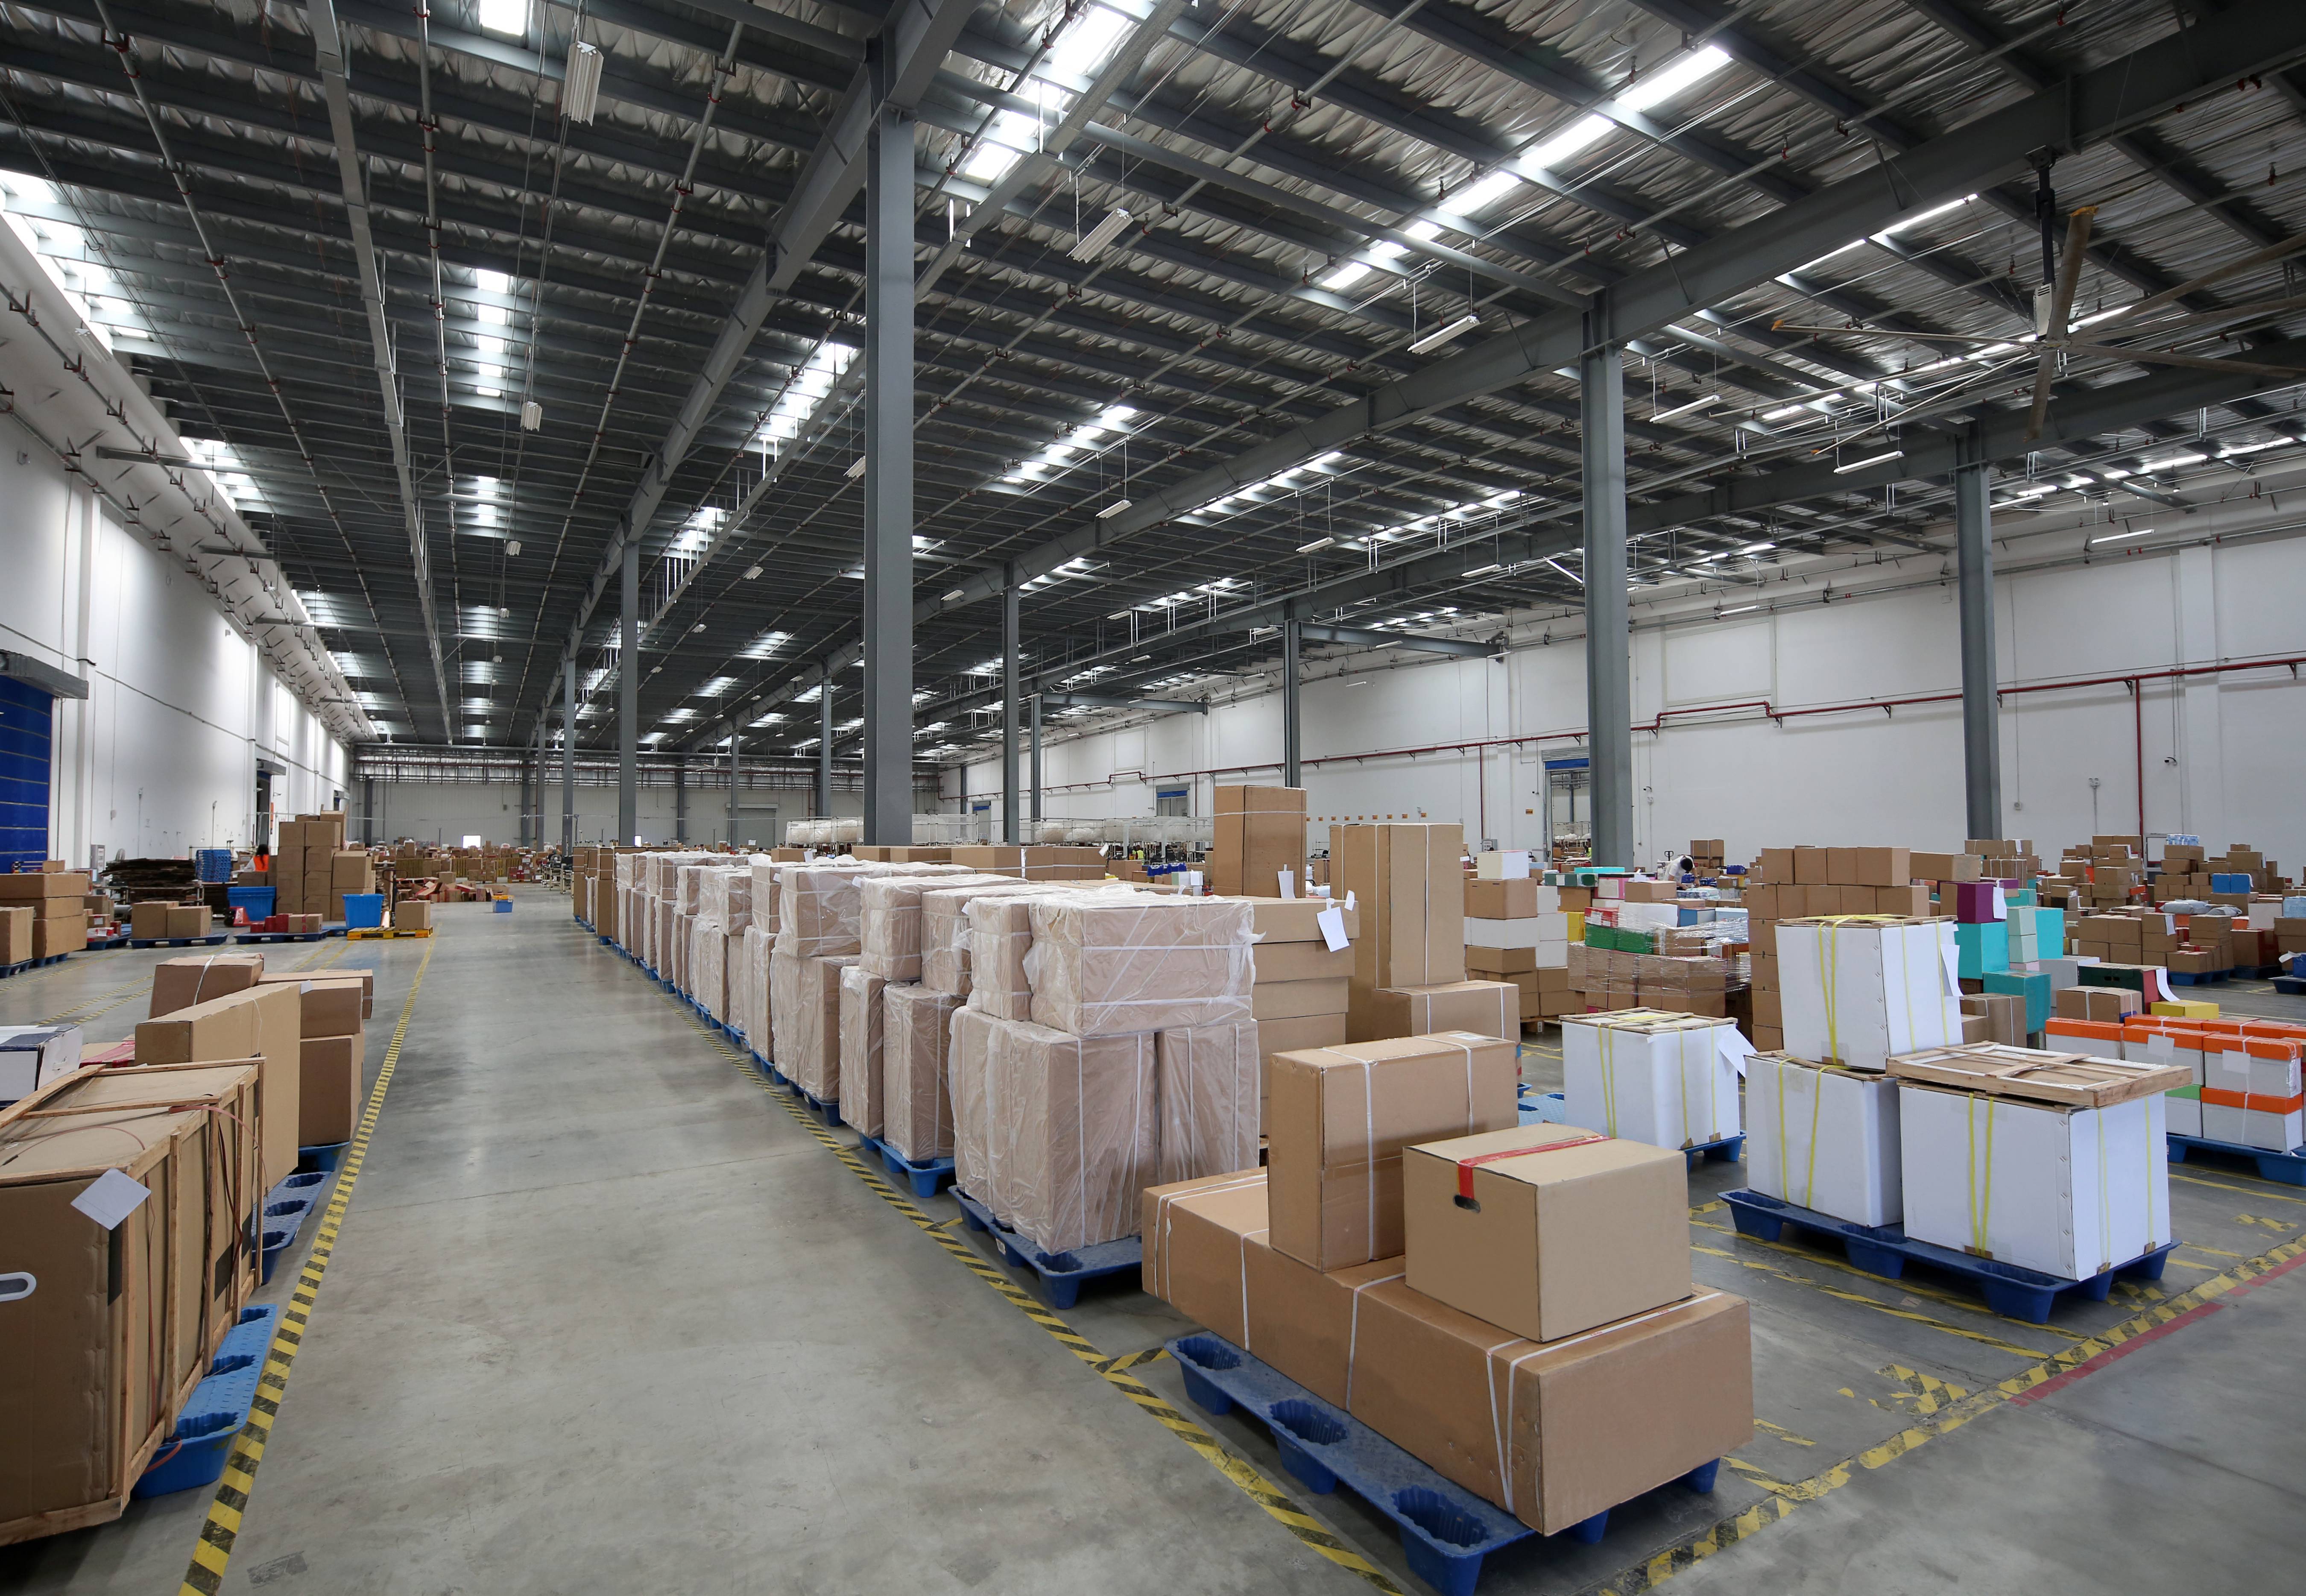 Boxes stored in a warehouse facility